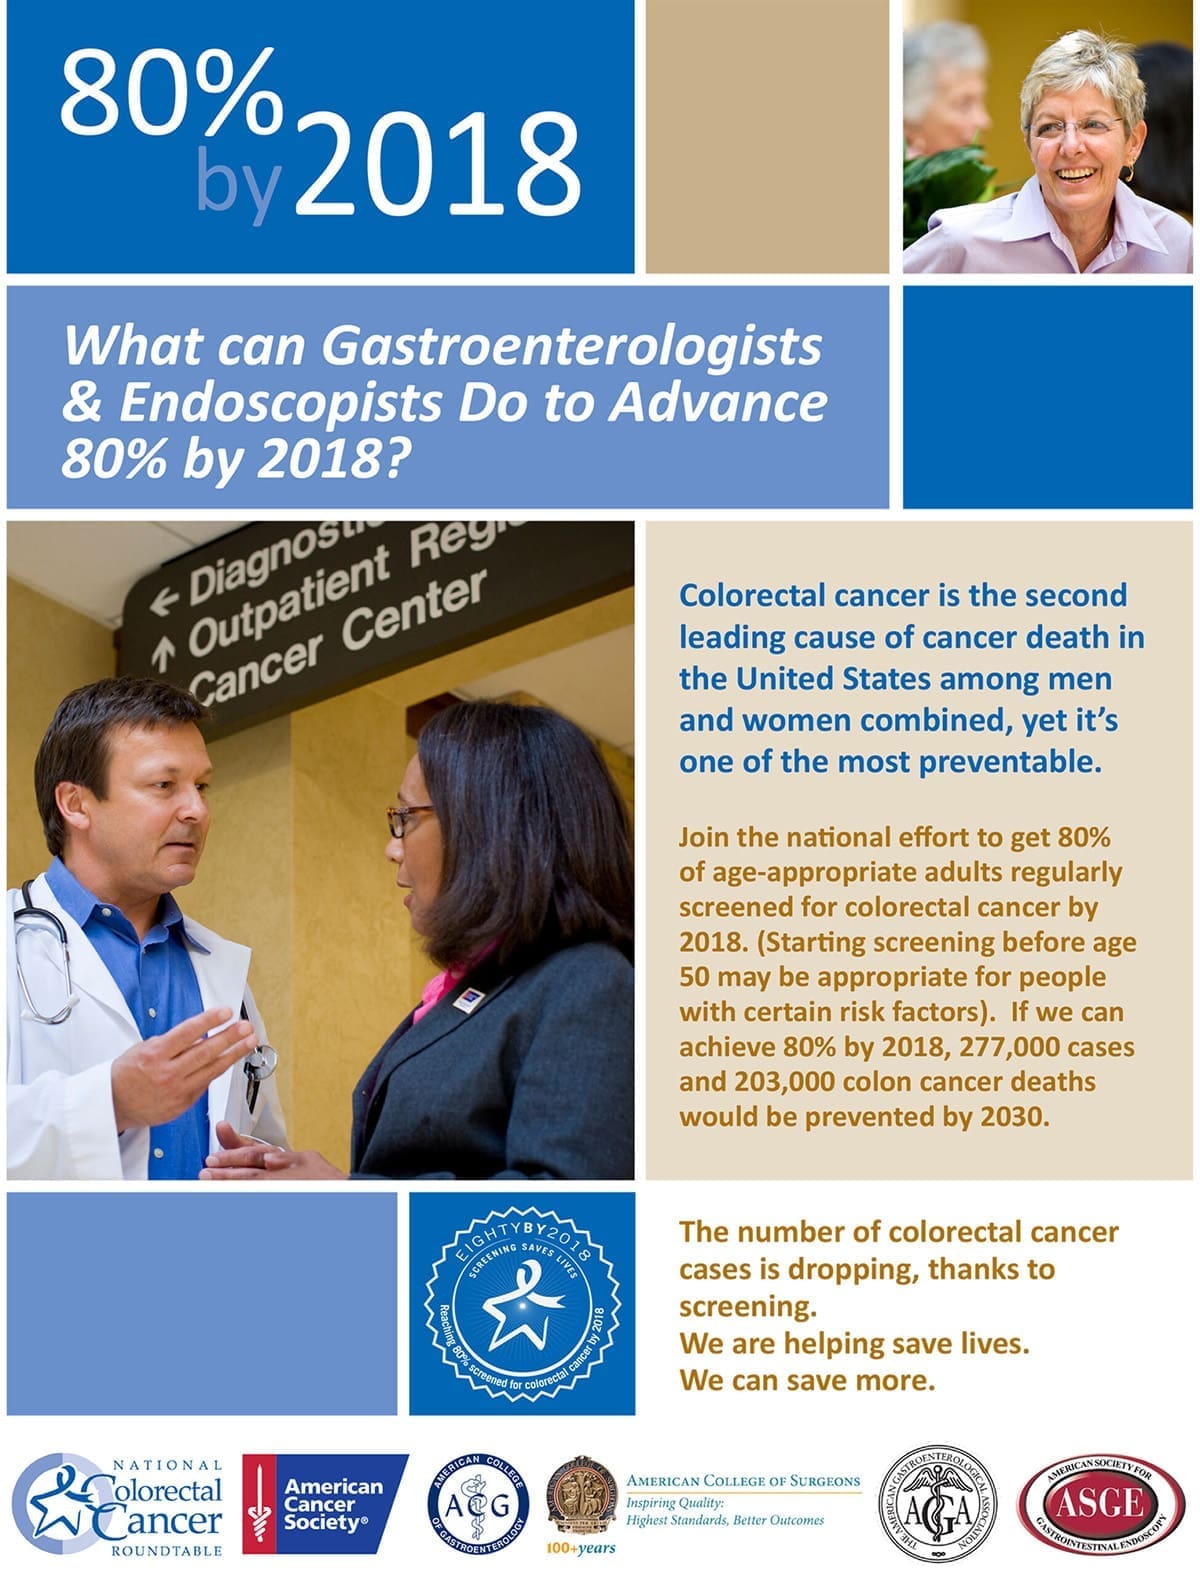 What Can Gastroenterologists & Endoscopists Do To Advance 80% By 2018?